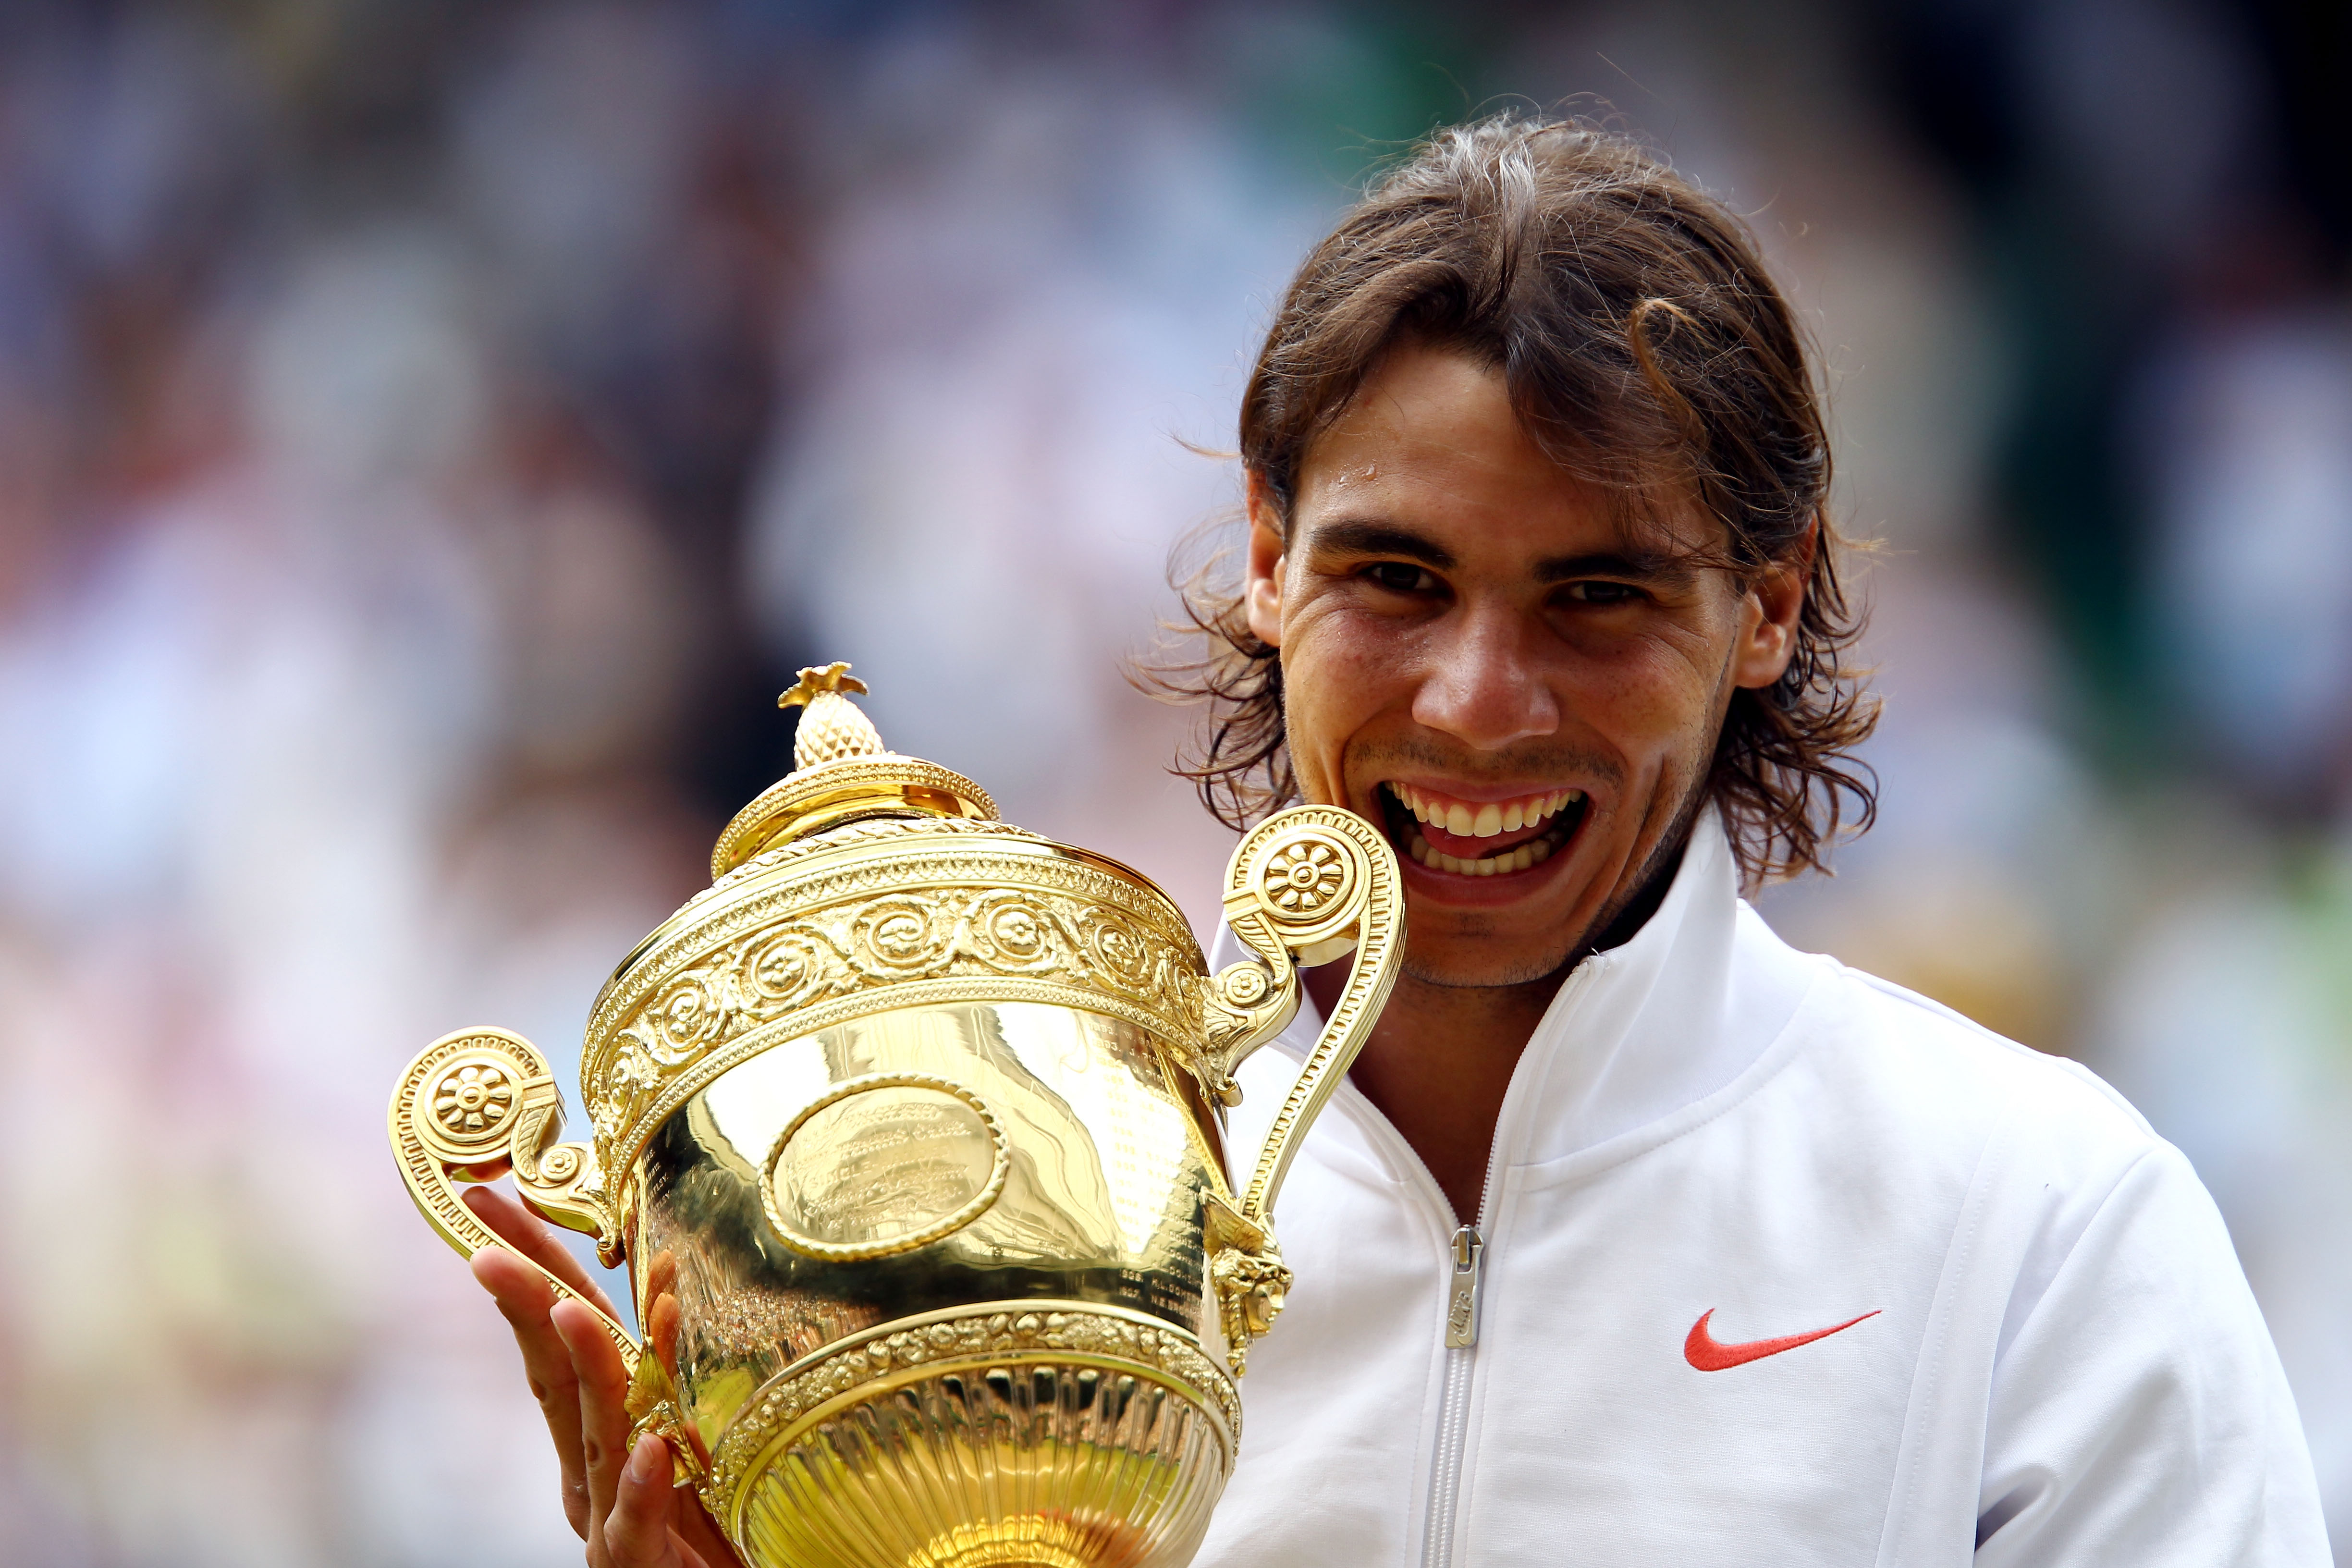 LONDON, ENGLAND - JULY 04:  Rafael Nadal of Spain holds the Championship trophy after winning the Men's Singles Final match against Tomas Berdych of Czech Republic on Day Thirteen of the Wimbledon Lawn Tennis Championships at the All England Lawn Tennis a